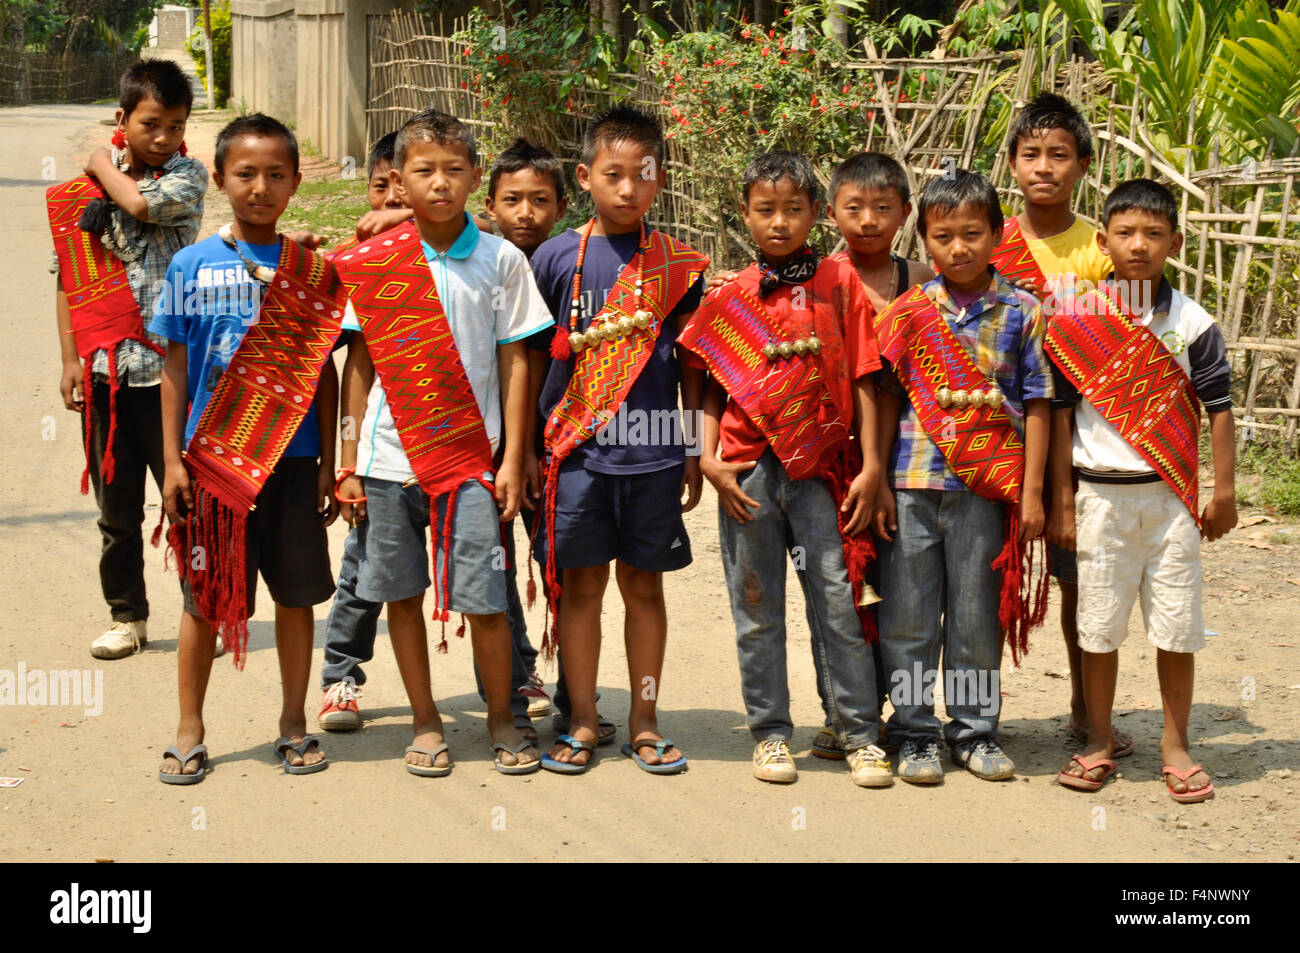 Nagaland, India - March 2012: Group of boys in Nagaland, remote region of India. Documentary editorial. Stock Photo